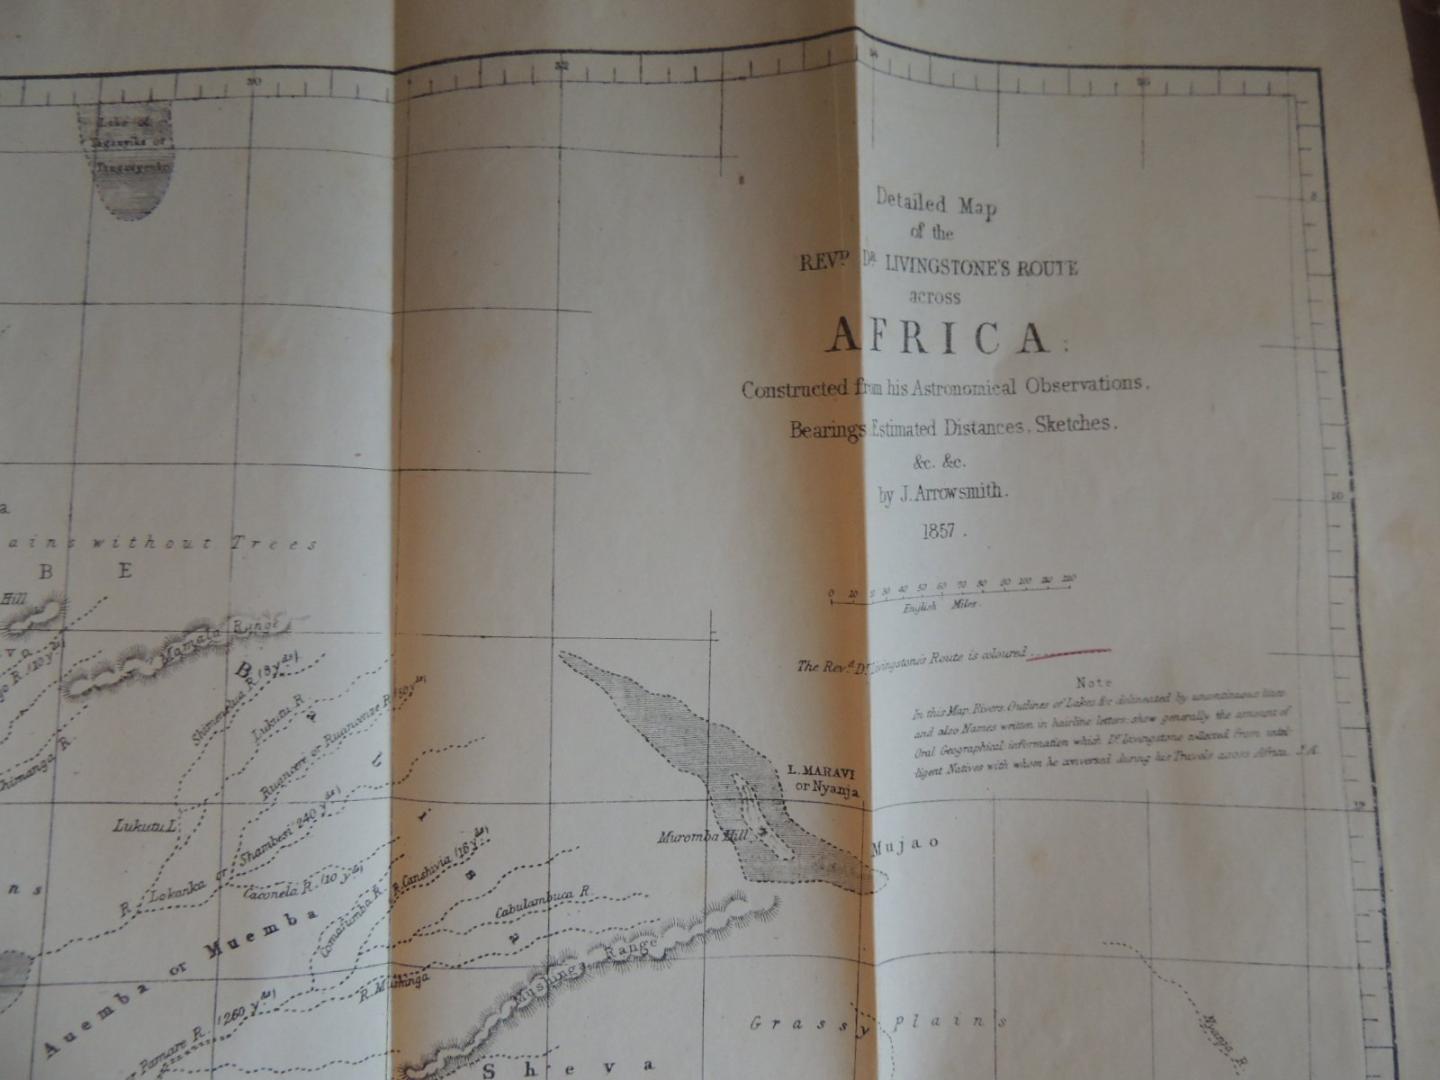 Livingstone, David - Missionary travels and researches in South Africa: including a sketch of sixteen years' residence in the interior of Africa